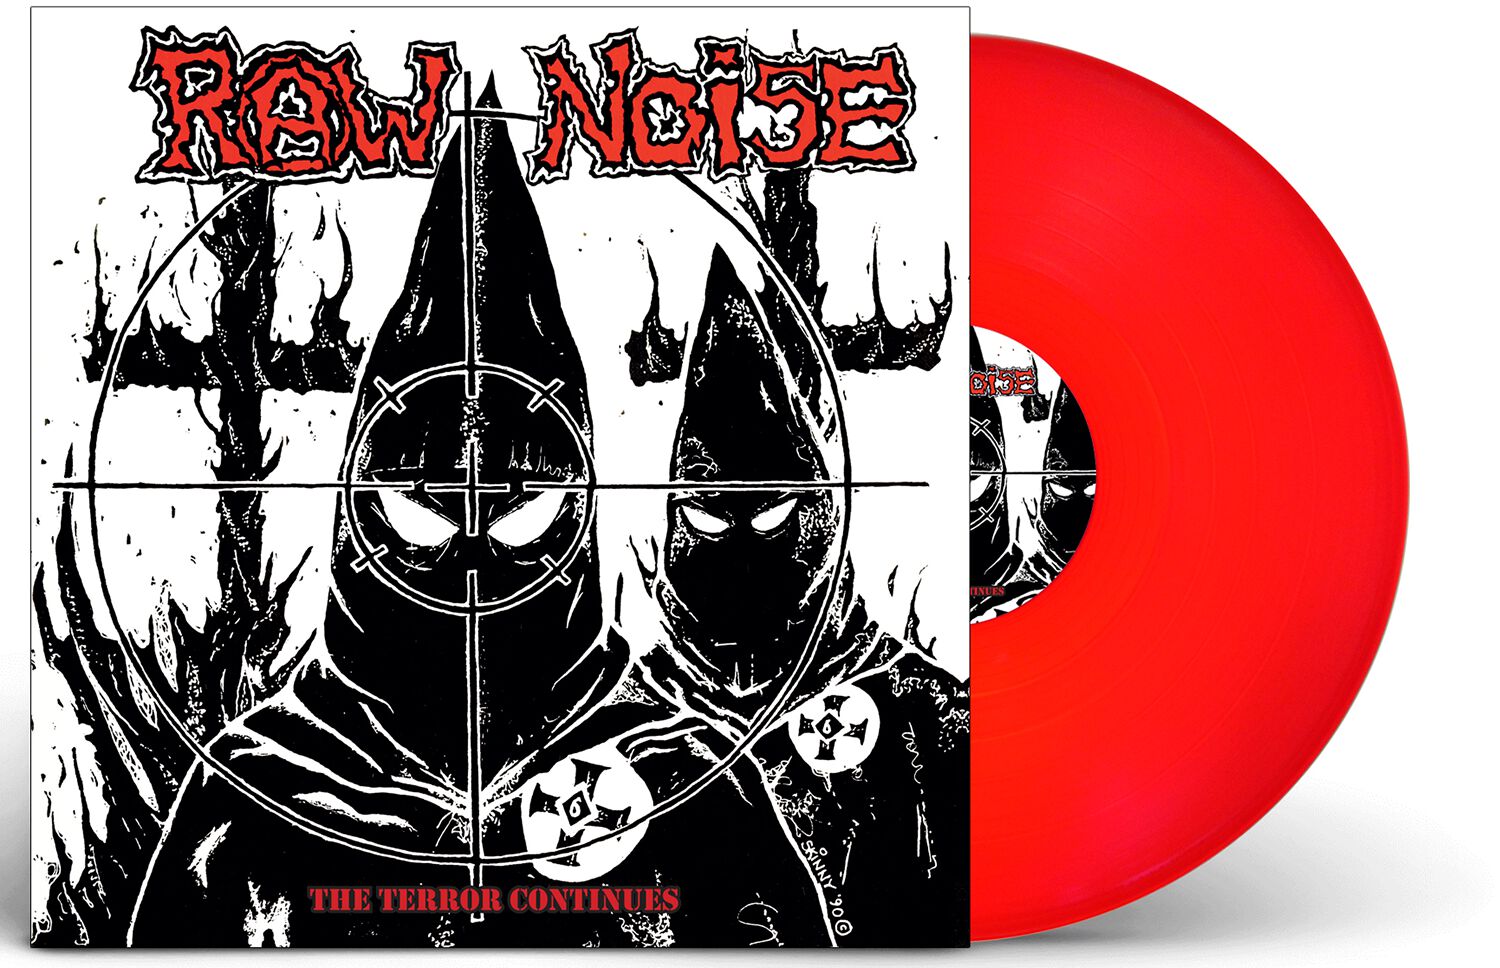 Raw Noise The terror continues LP red